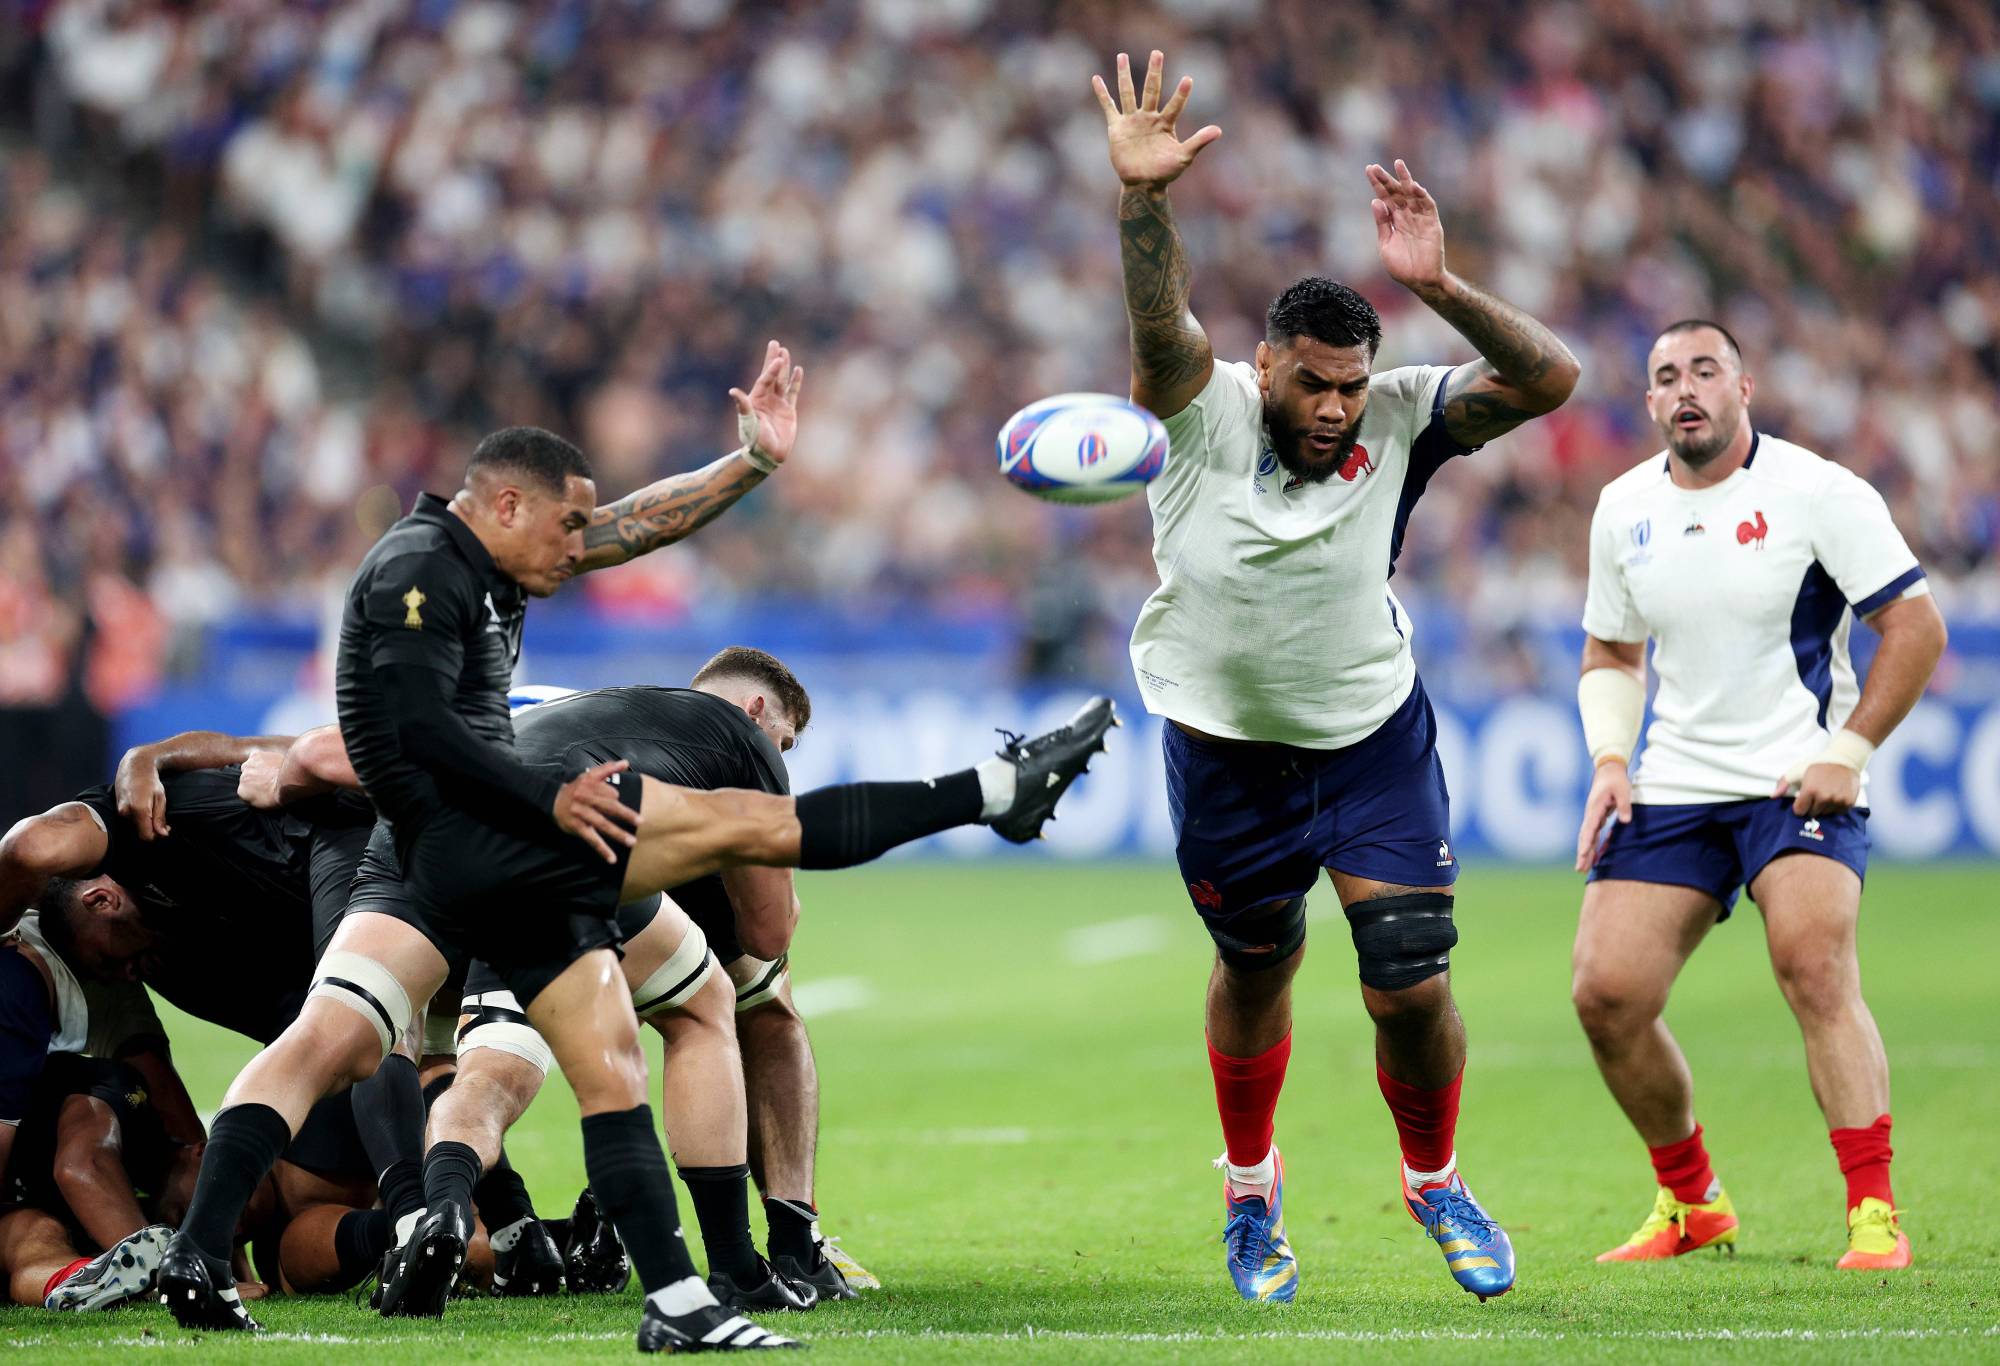 Aaron Smith of New Zealand plays a kick from the ruck ahead of Romain Taofifenua of France during the Rugby World Cup France 2023 Pool A match between France and New Zealand at Stade de France on September 08, 2023 in Paris, France. (Photo by Warren Little/Getty Images)